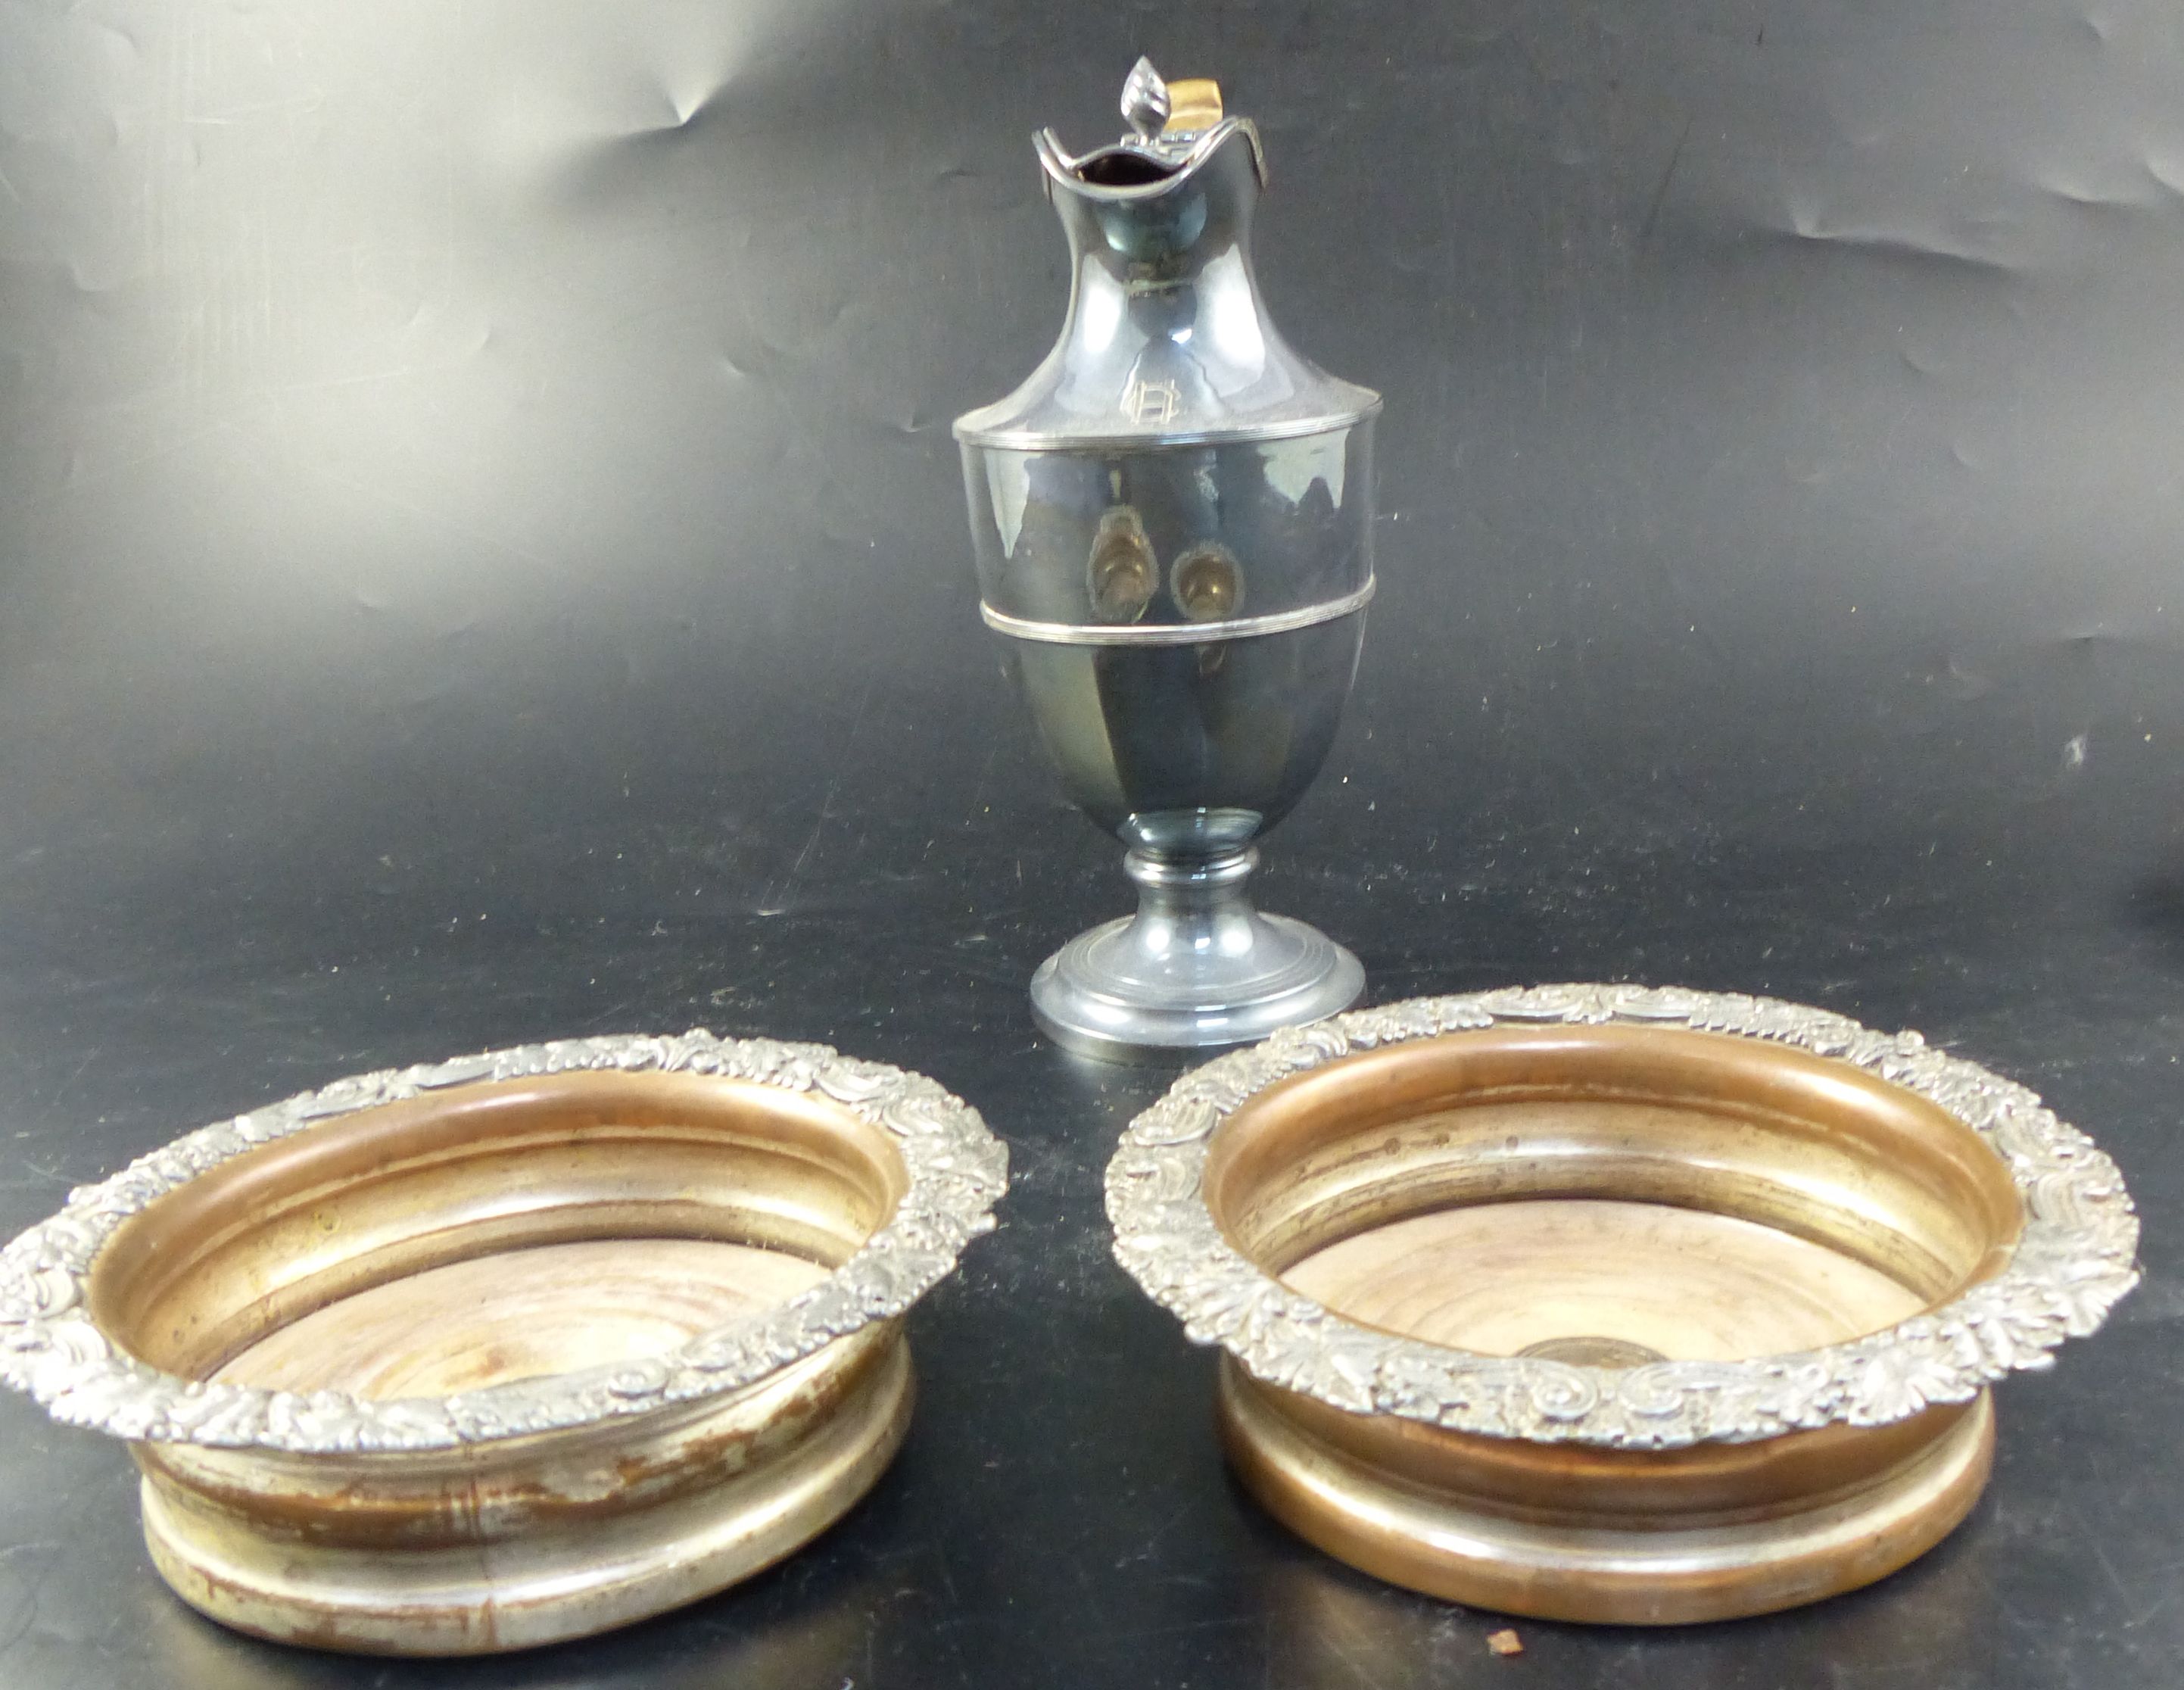 A pair of Old Sheffield plate coasters, width 16cm